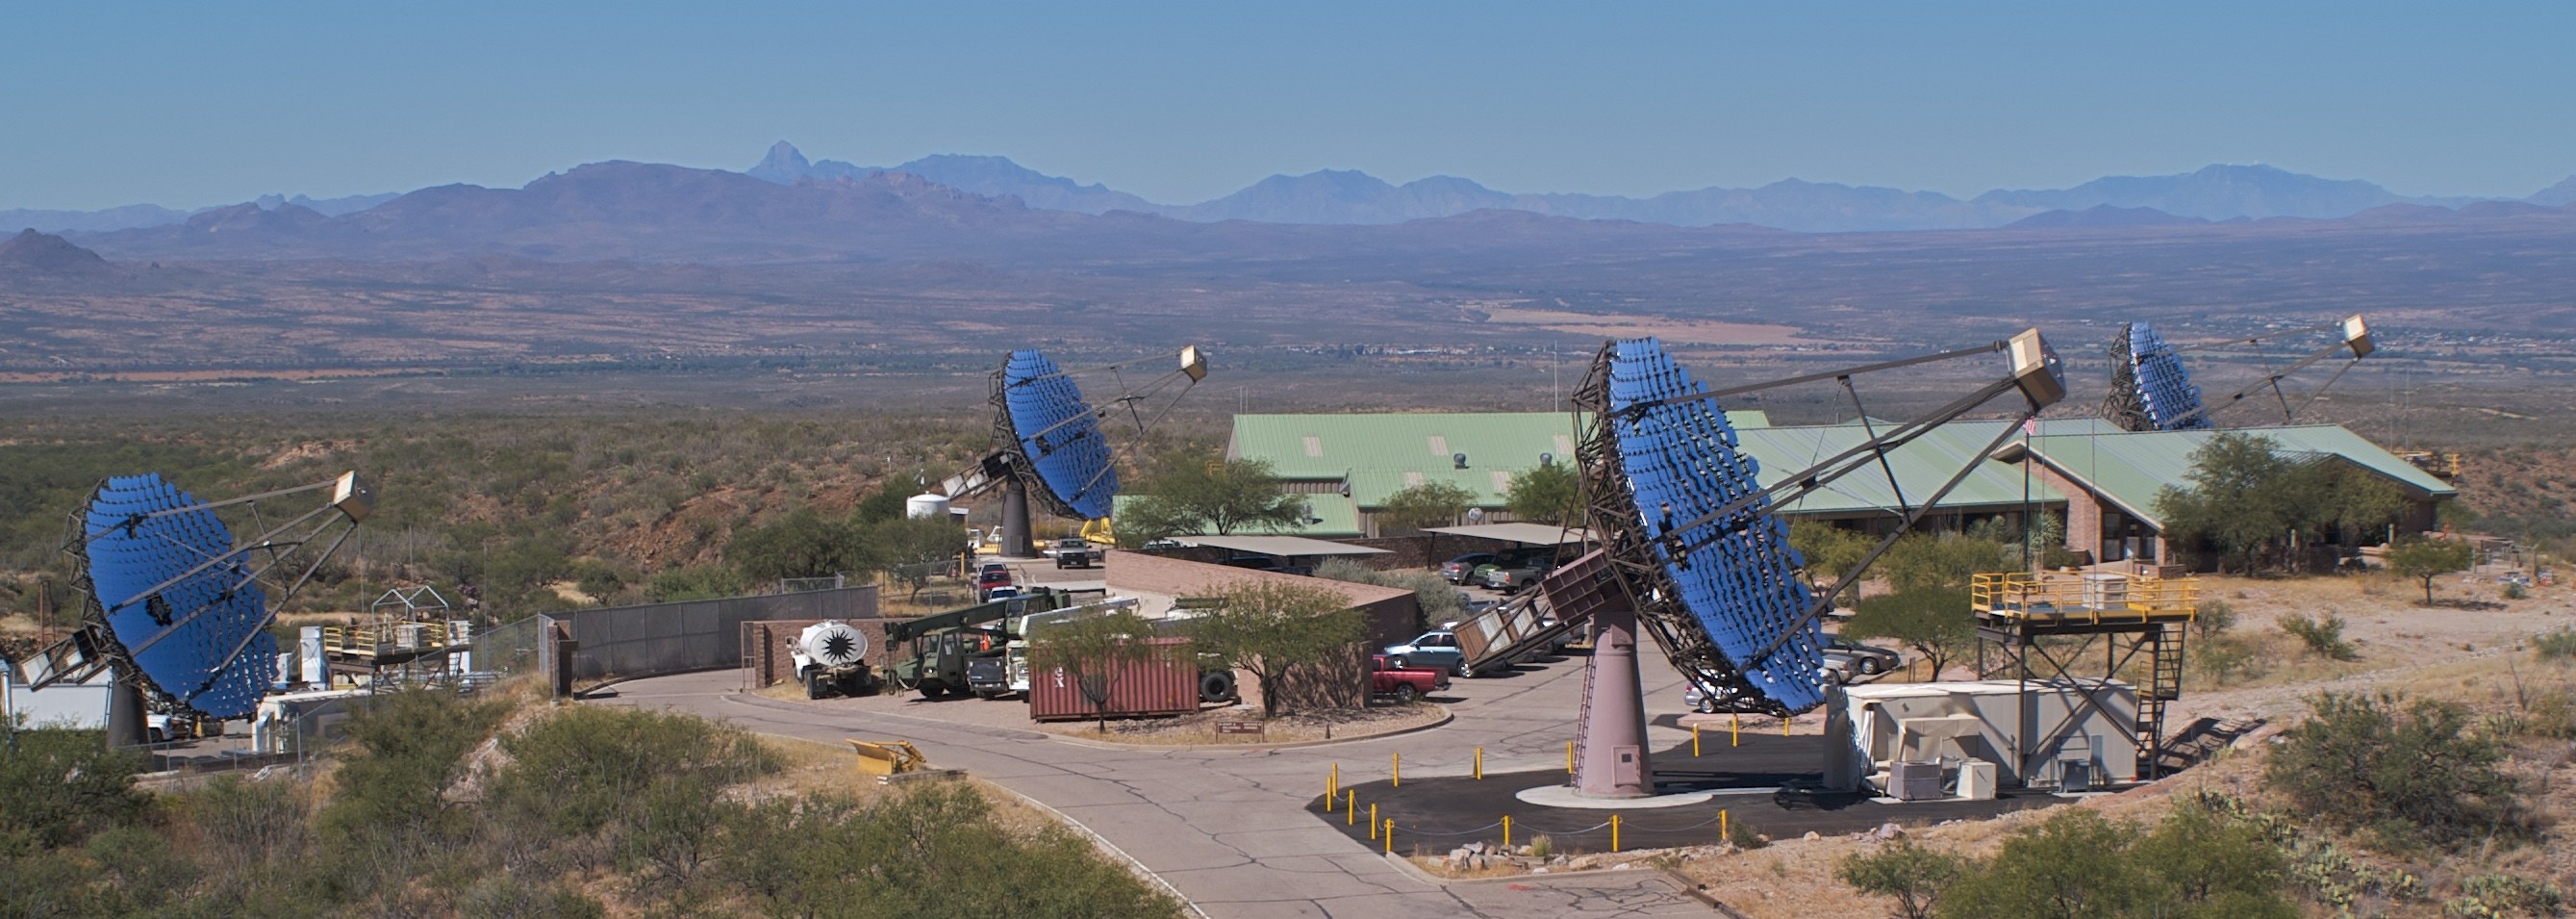 The VERITAS telescopes located at the Fred Lawrence Whipple Observatory base-camp in Arizona.